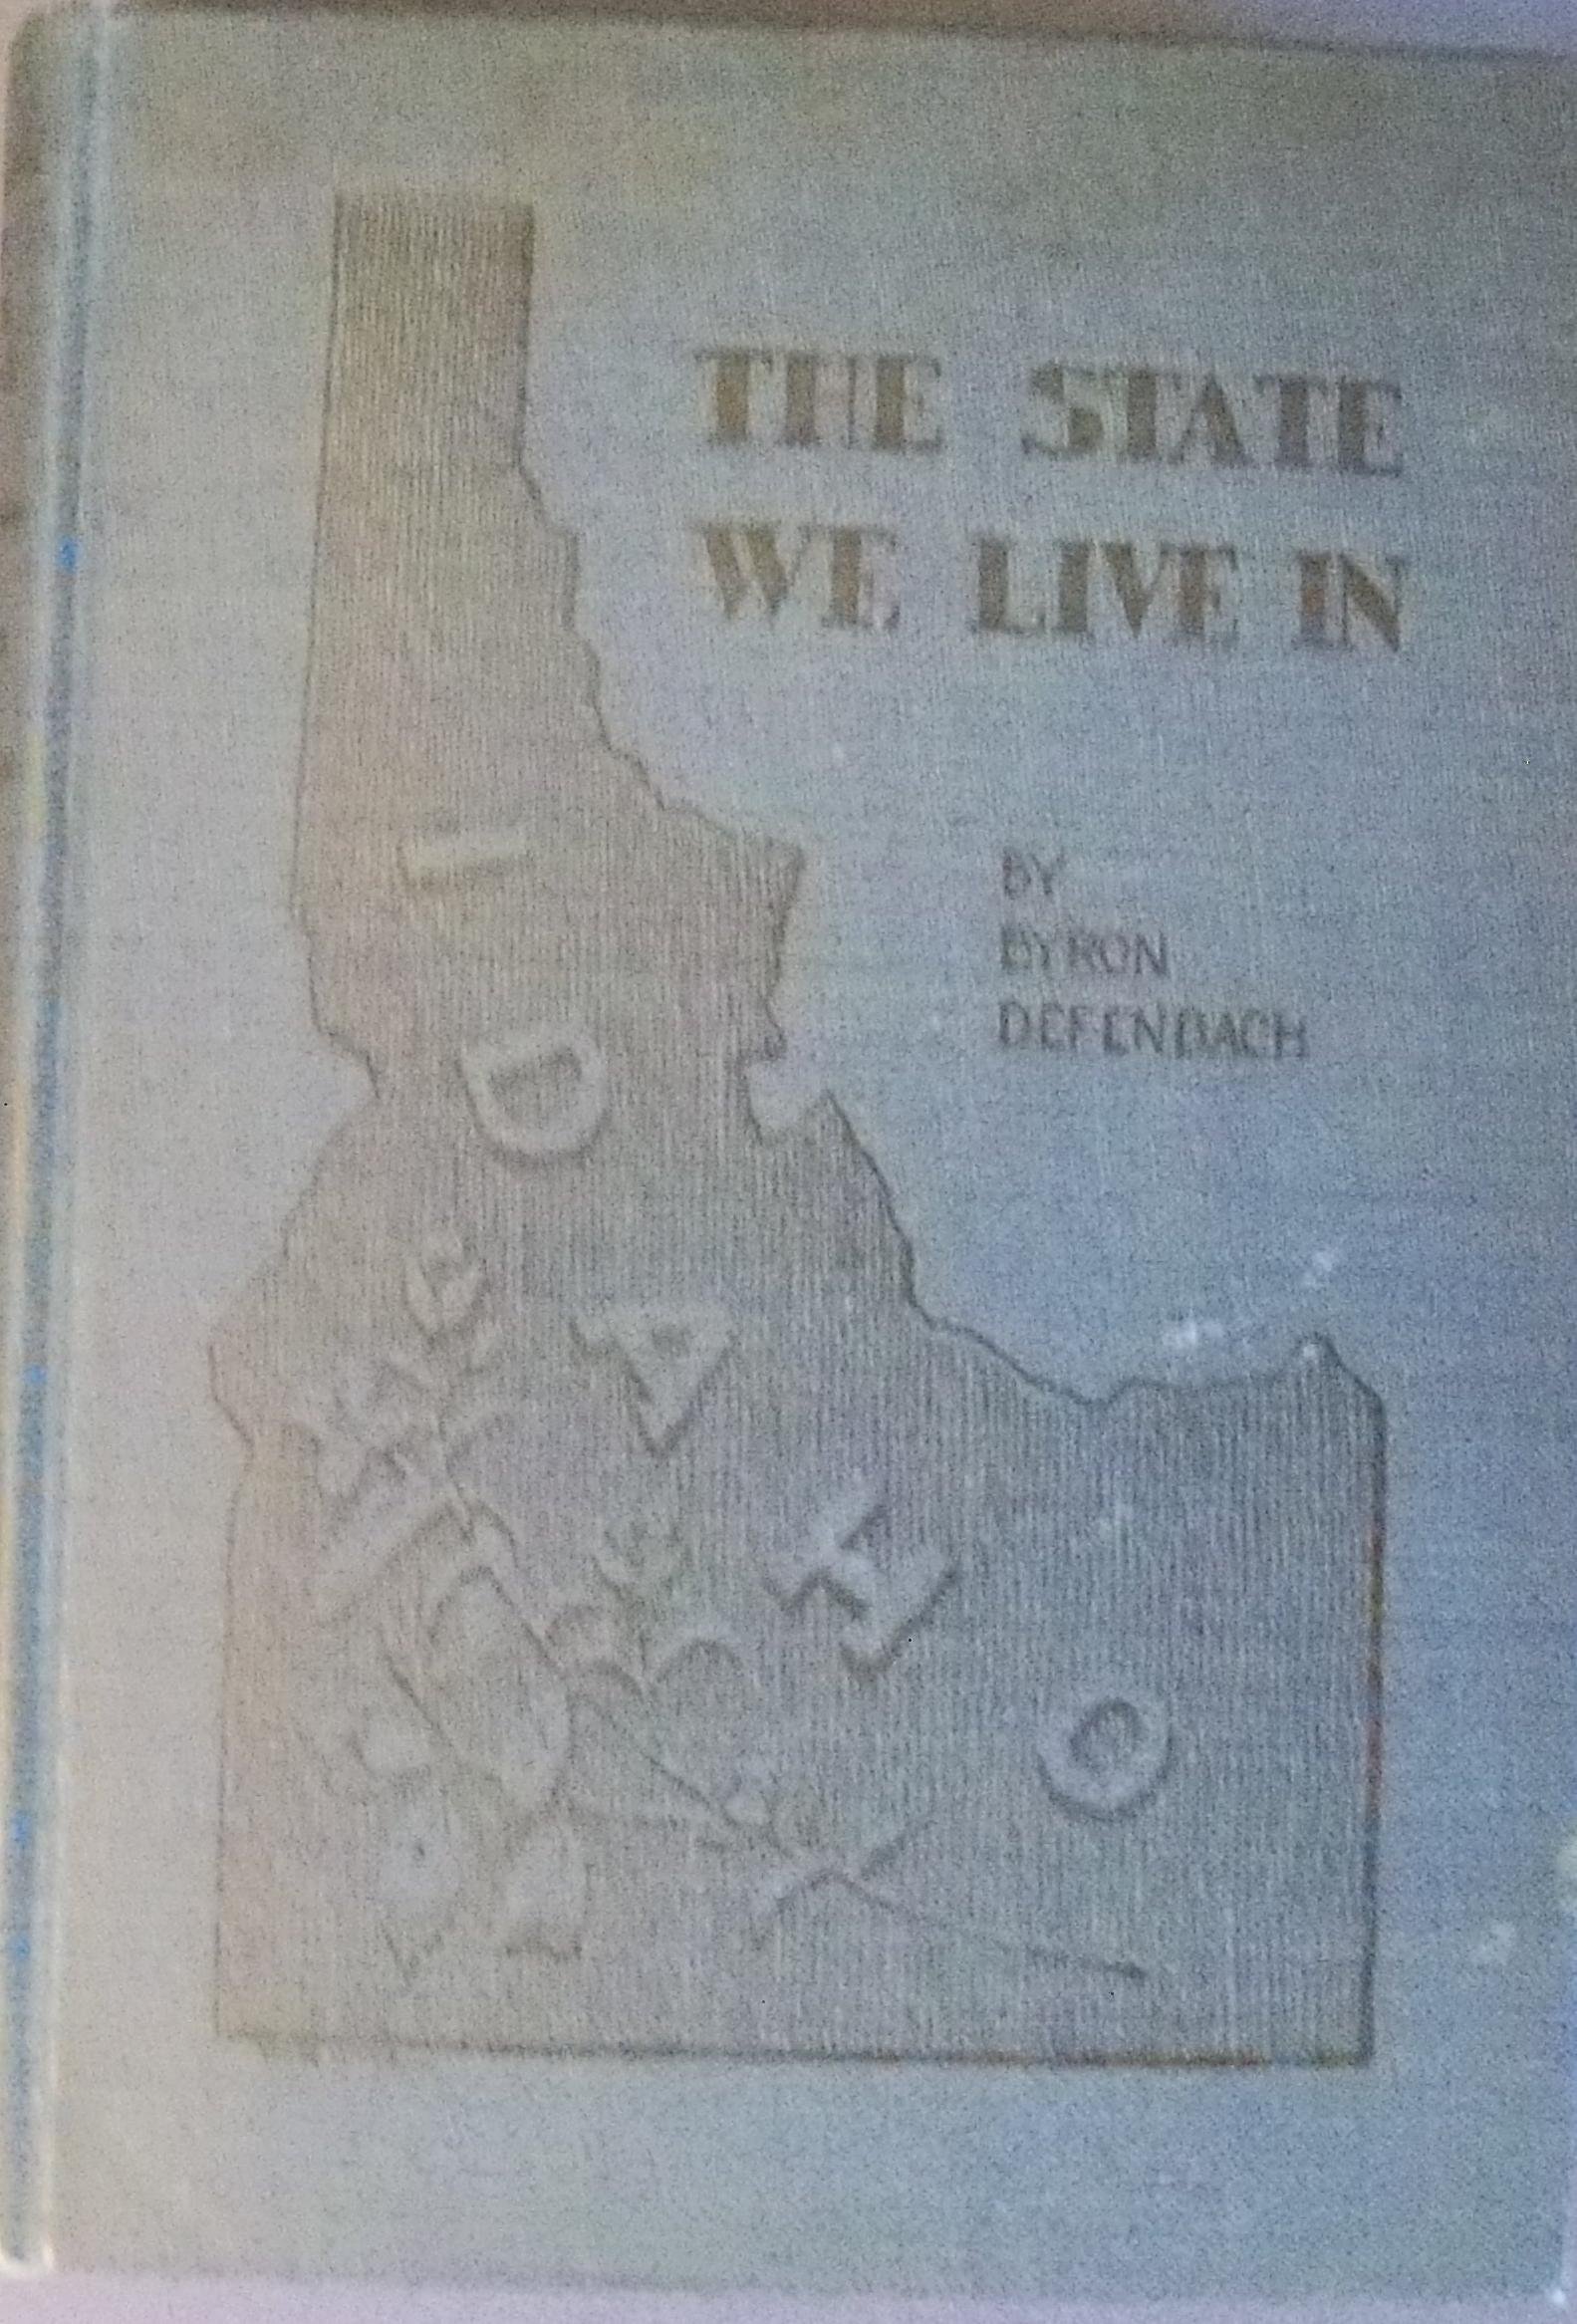 The state we live in, Idaho (book cover)